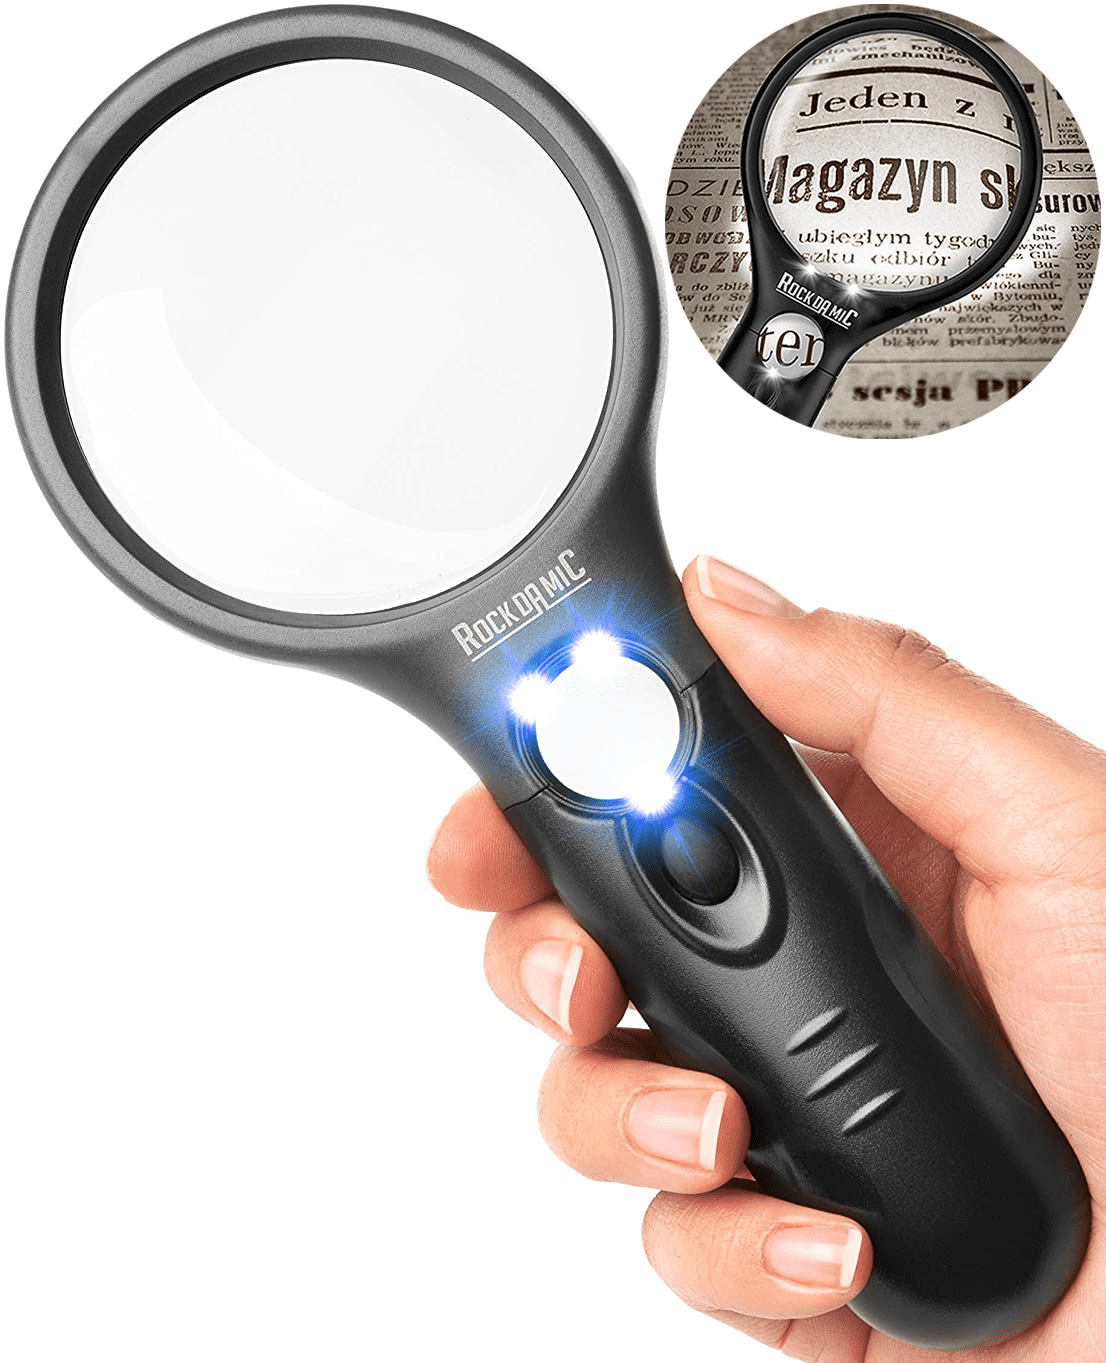 RockDaMic Professional Magnifying Glass with Light (3X / 45x) Large Lighted  Handheld Glass Magnifier Lupa for Reading, Jewelry, Coins, Stamps, Fine